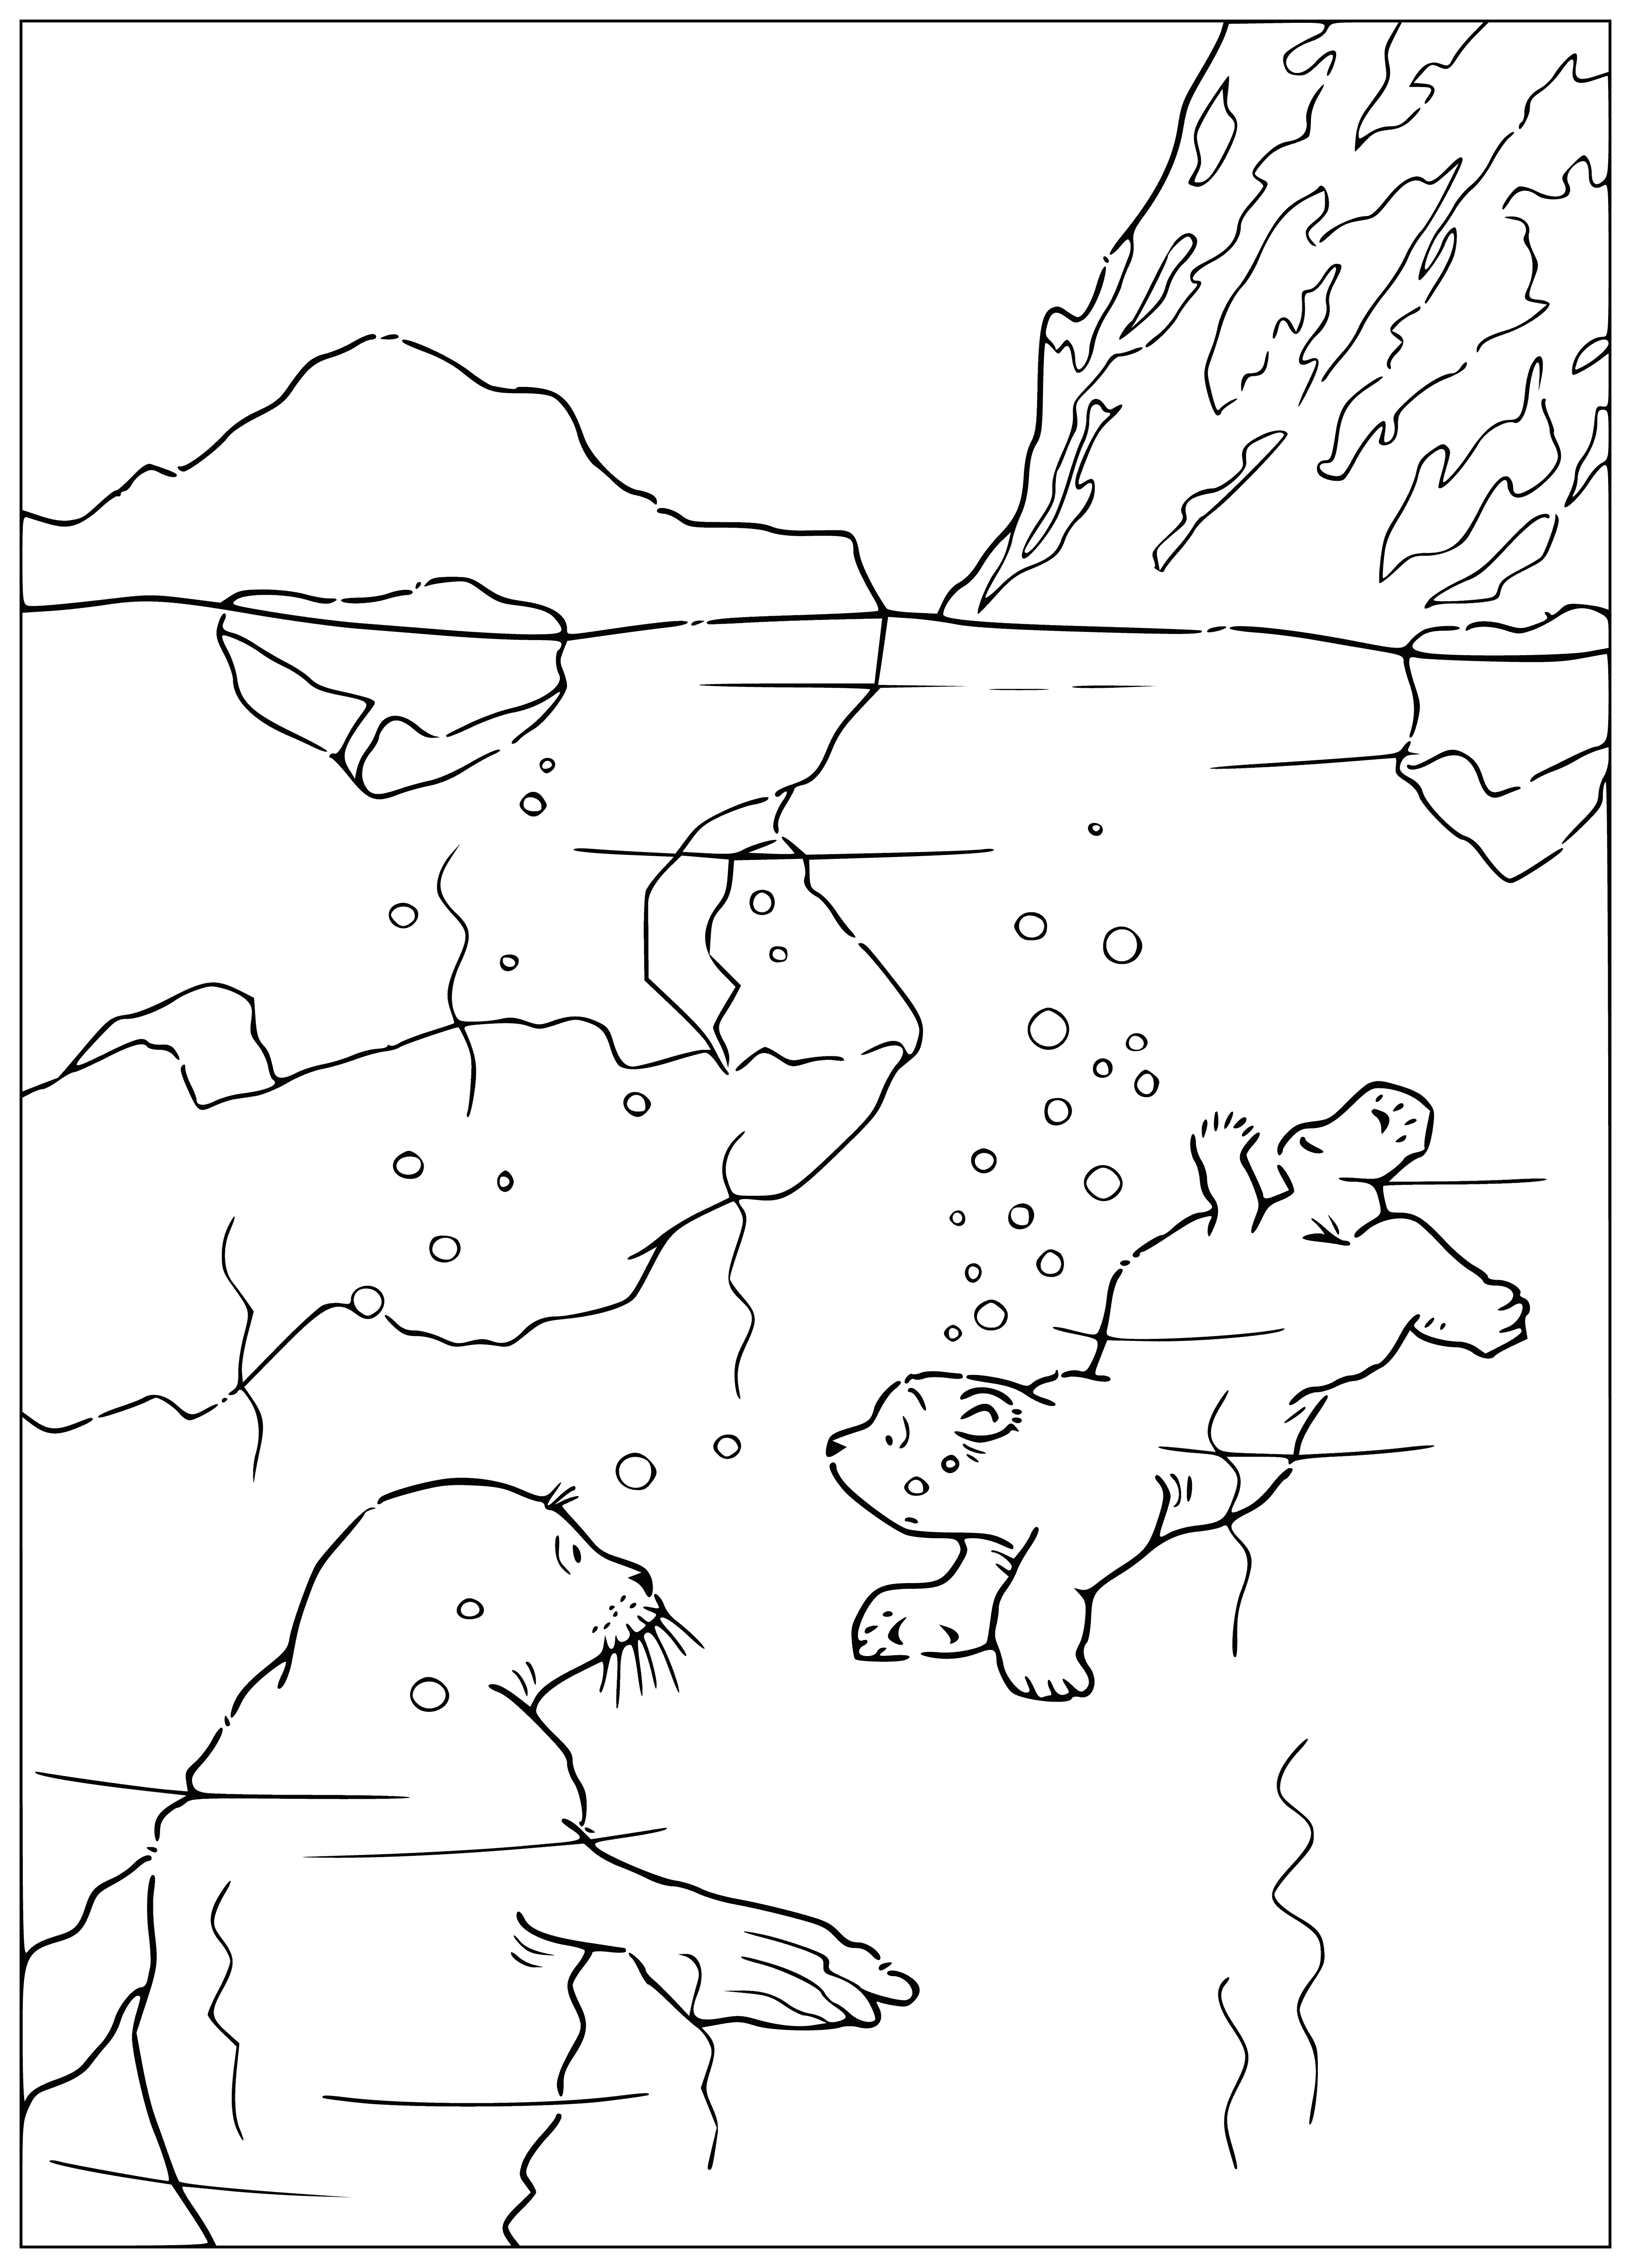 coloring page: Little polar bear holds a blue teddy bear & white seal, the teddy wearing a red ribbon. Seal looks at the bear, head tilted.